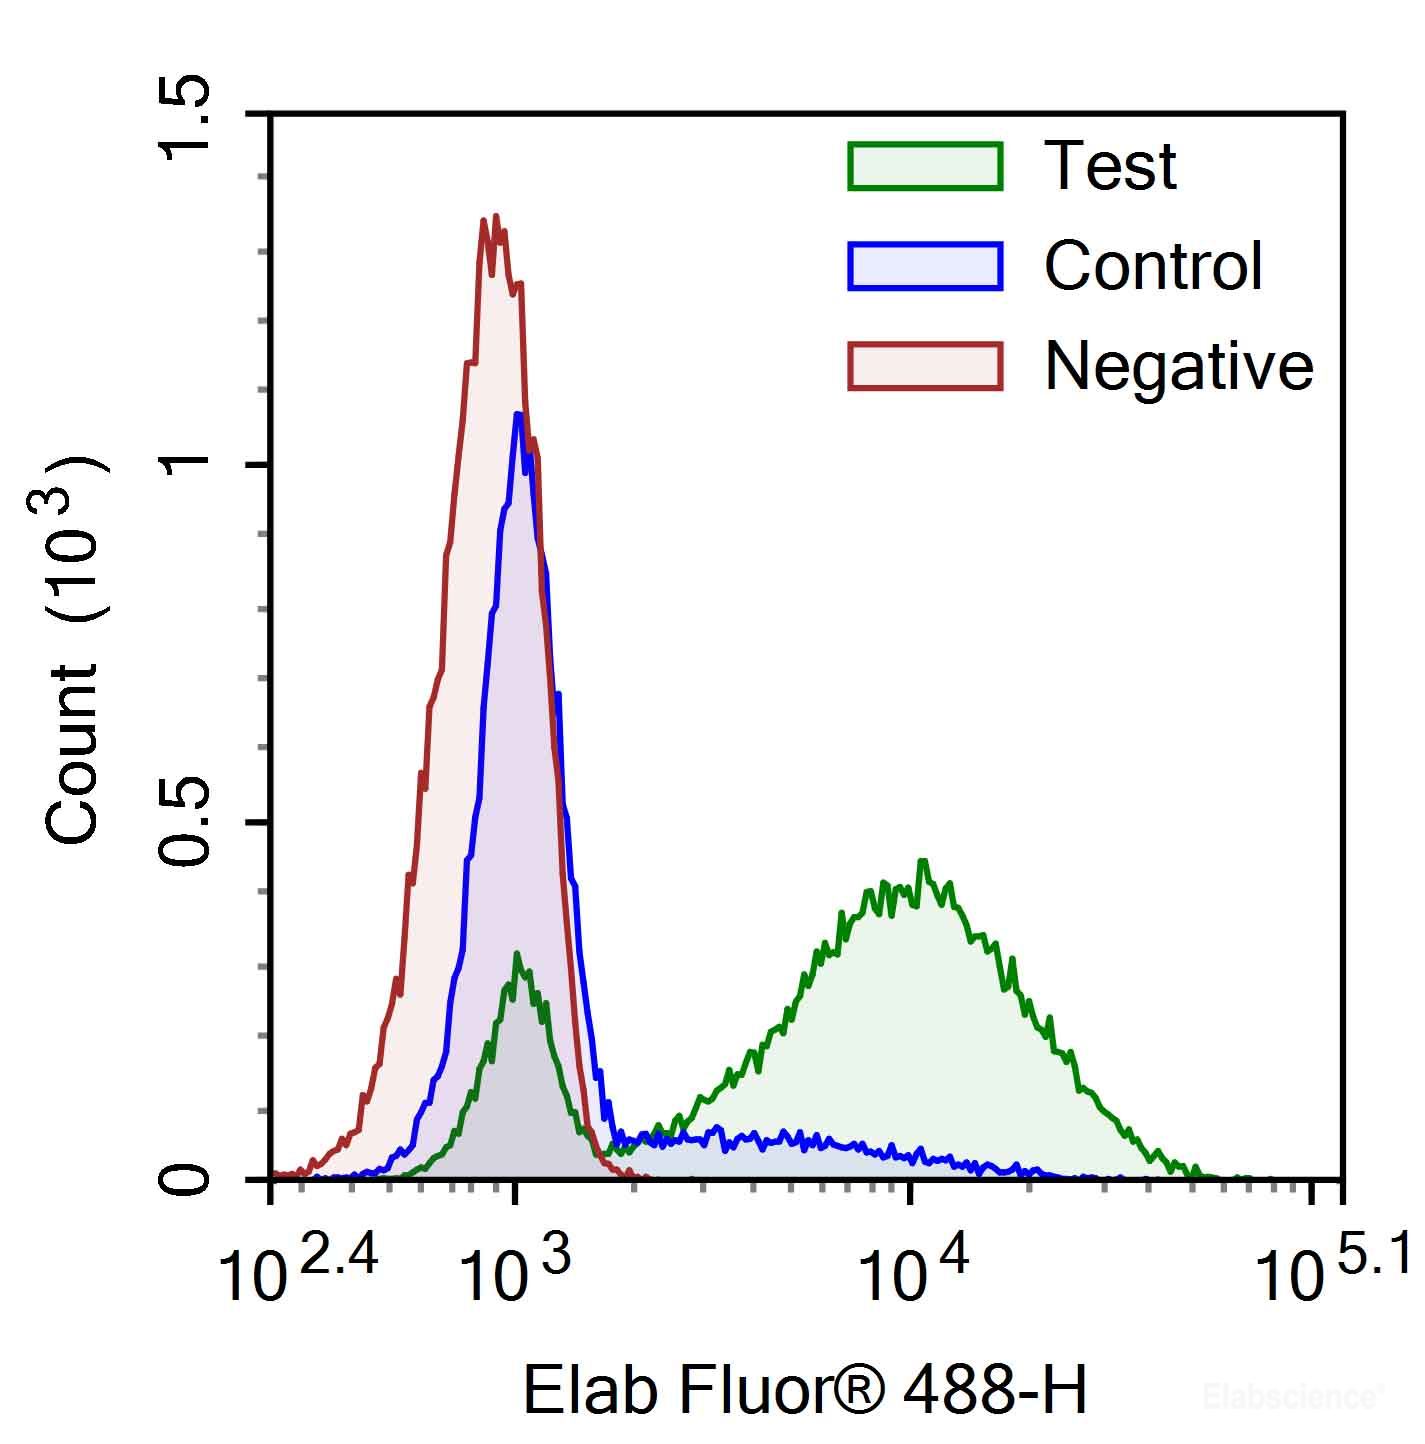 Camptothecin-induced apoptosis in HL-60 cells. Test: HL-60 cells were treated with 2.5 μM Camptothecin for 4h. Control: Normal HL-60 cells were not treated with drugs. Negative: HL-60 cells were treated with 2.5 μM camptothecin for 4h without TdT enzyme.